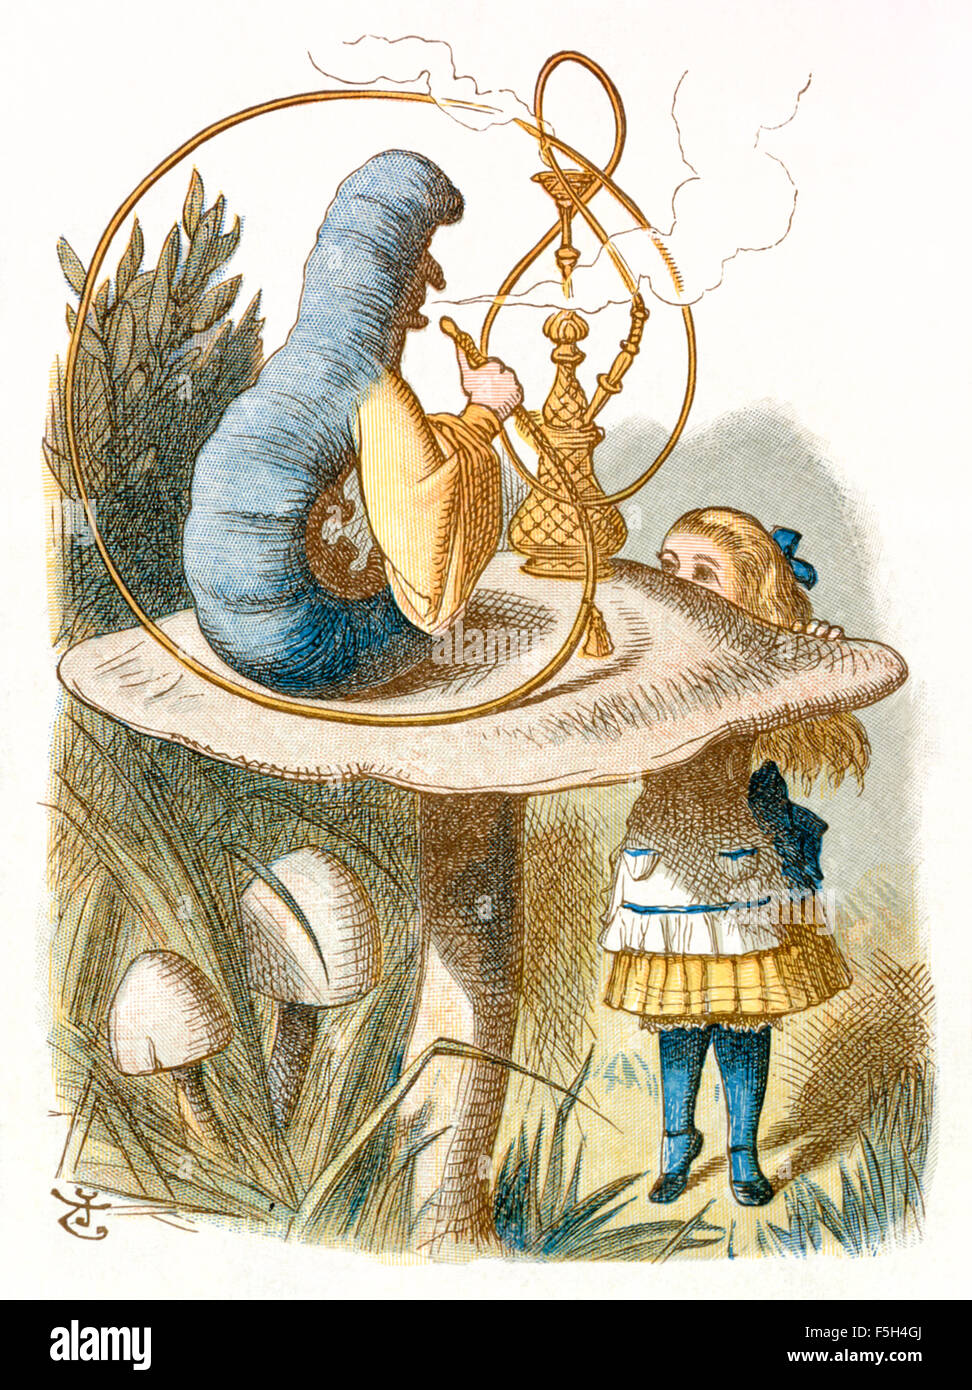 The Blue Caterpillar from 'The Nursery “Alice'', an shortened adaptation of ‘Alice’s Adventures in Wonderland’ aimed at under-fives written by Lewis Carroll (1832-1898) himself. This edition contains 20 selected illustrations by Sir John Tenniel (1820-1914) from the original book which were enlarged and coloured by Emily Gertrude Thomson (1850-1929). See description for more information. Stock Photo